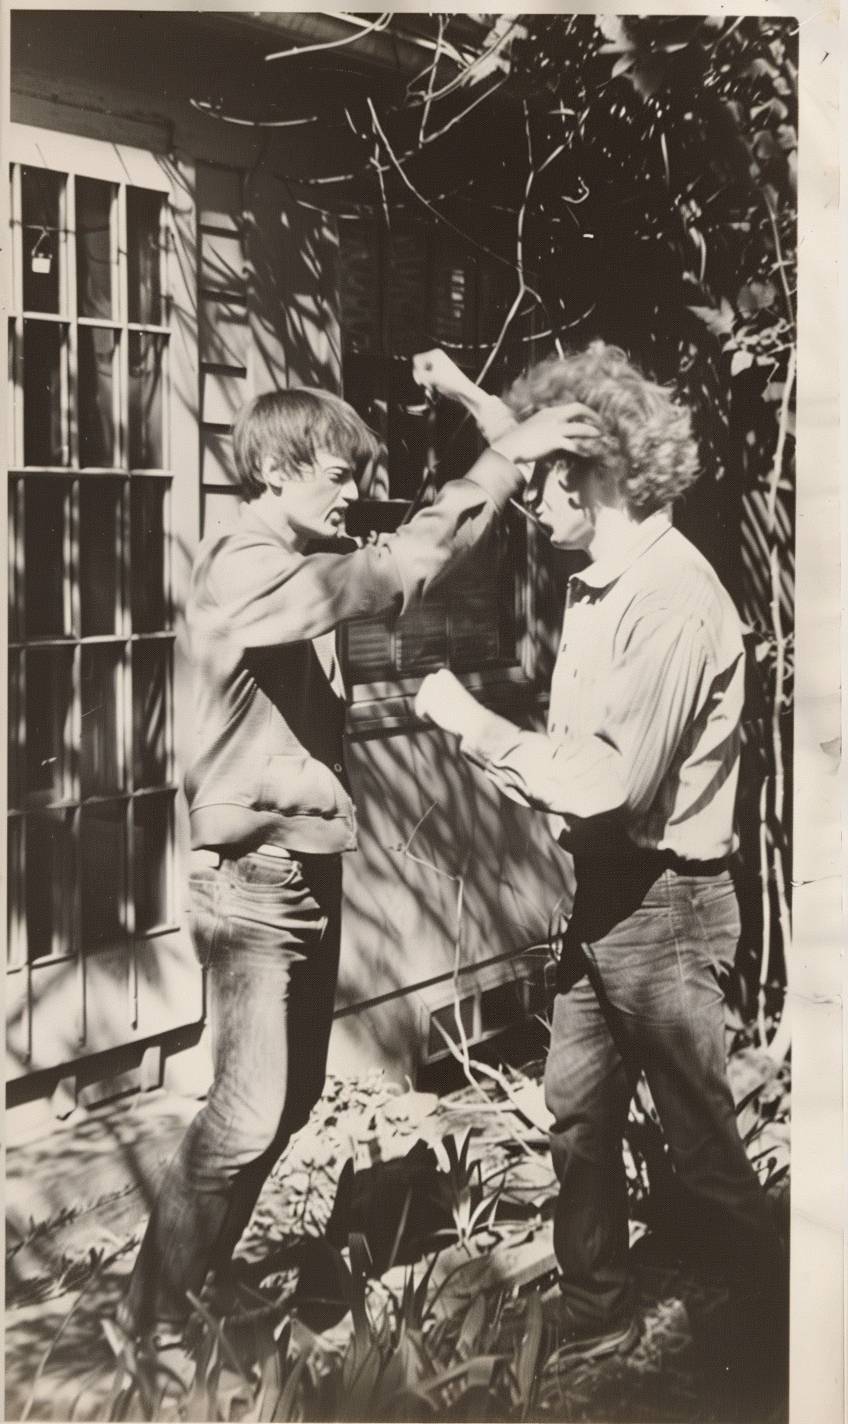 Two men, brothers, one with hair, arguing outside a house on a patio in 1980, realistic arms, vintage photograph, flash photography